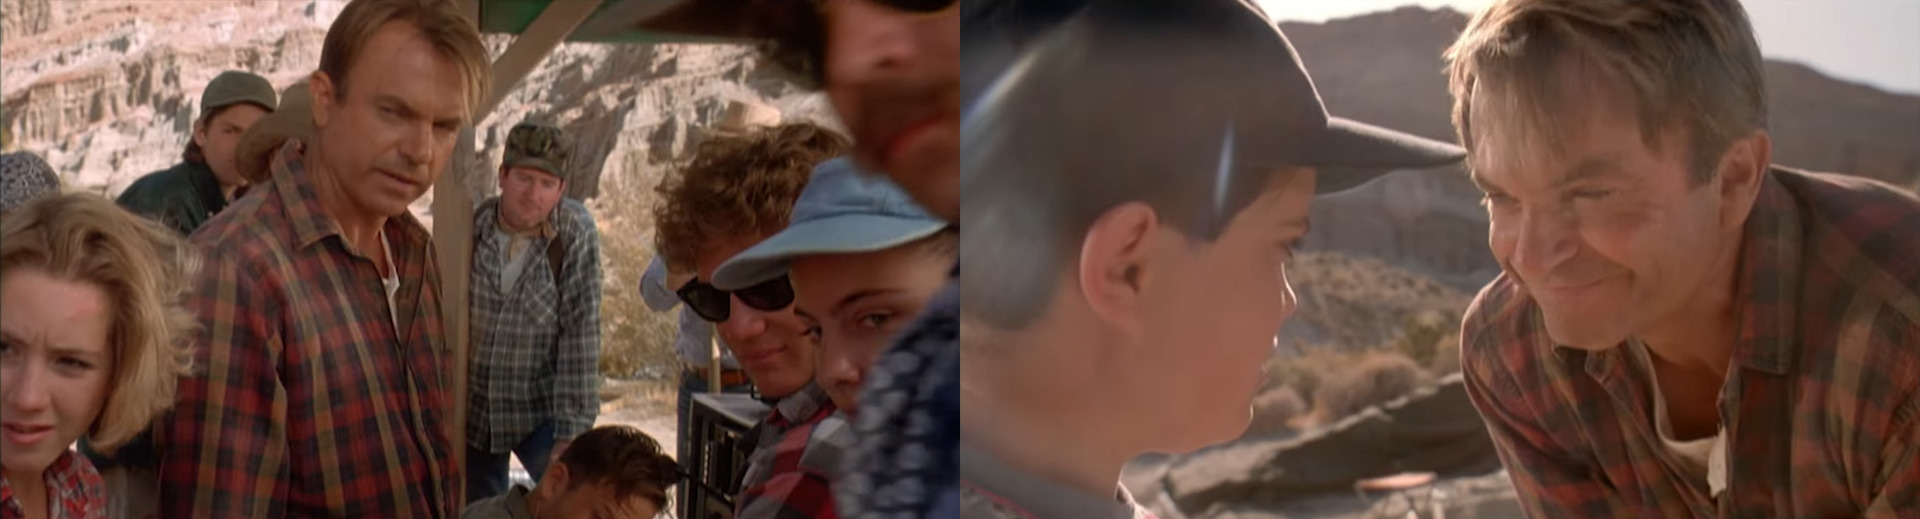 Left: Grant and his team turns hearing the kid's comment, right: Grant talks to the kid